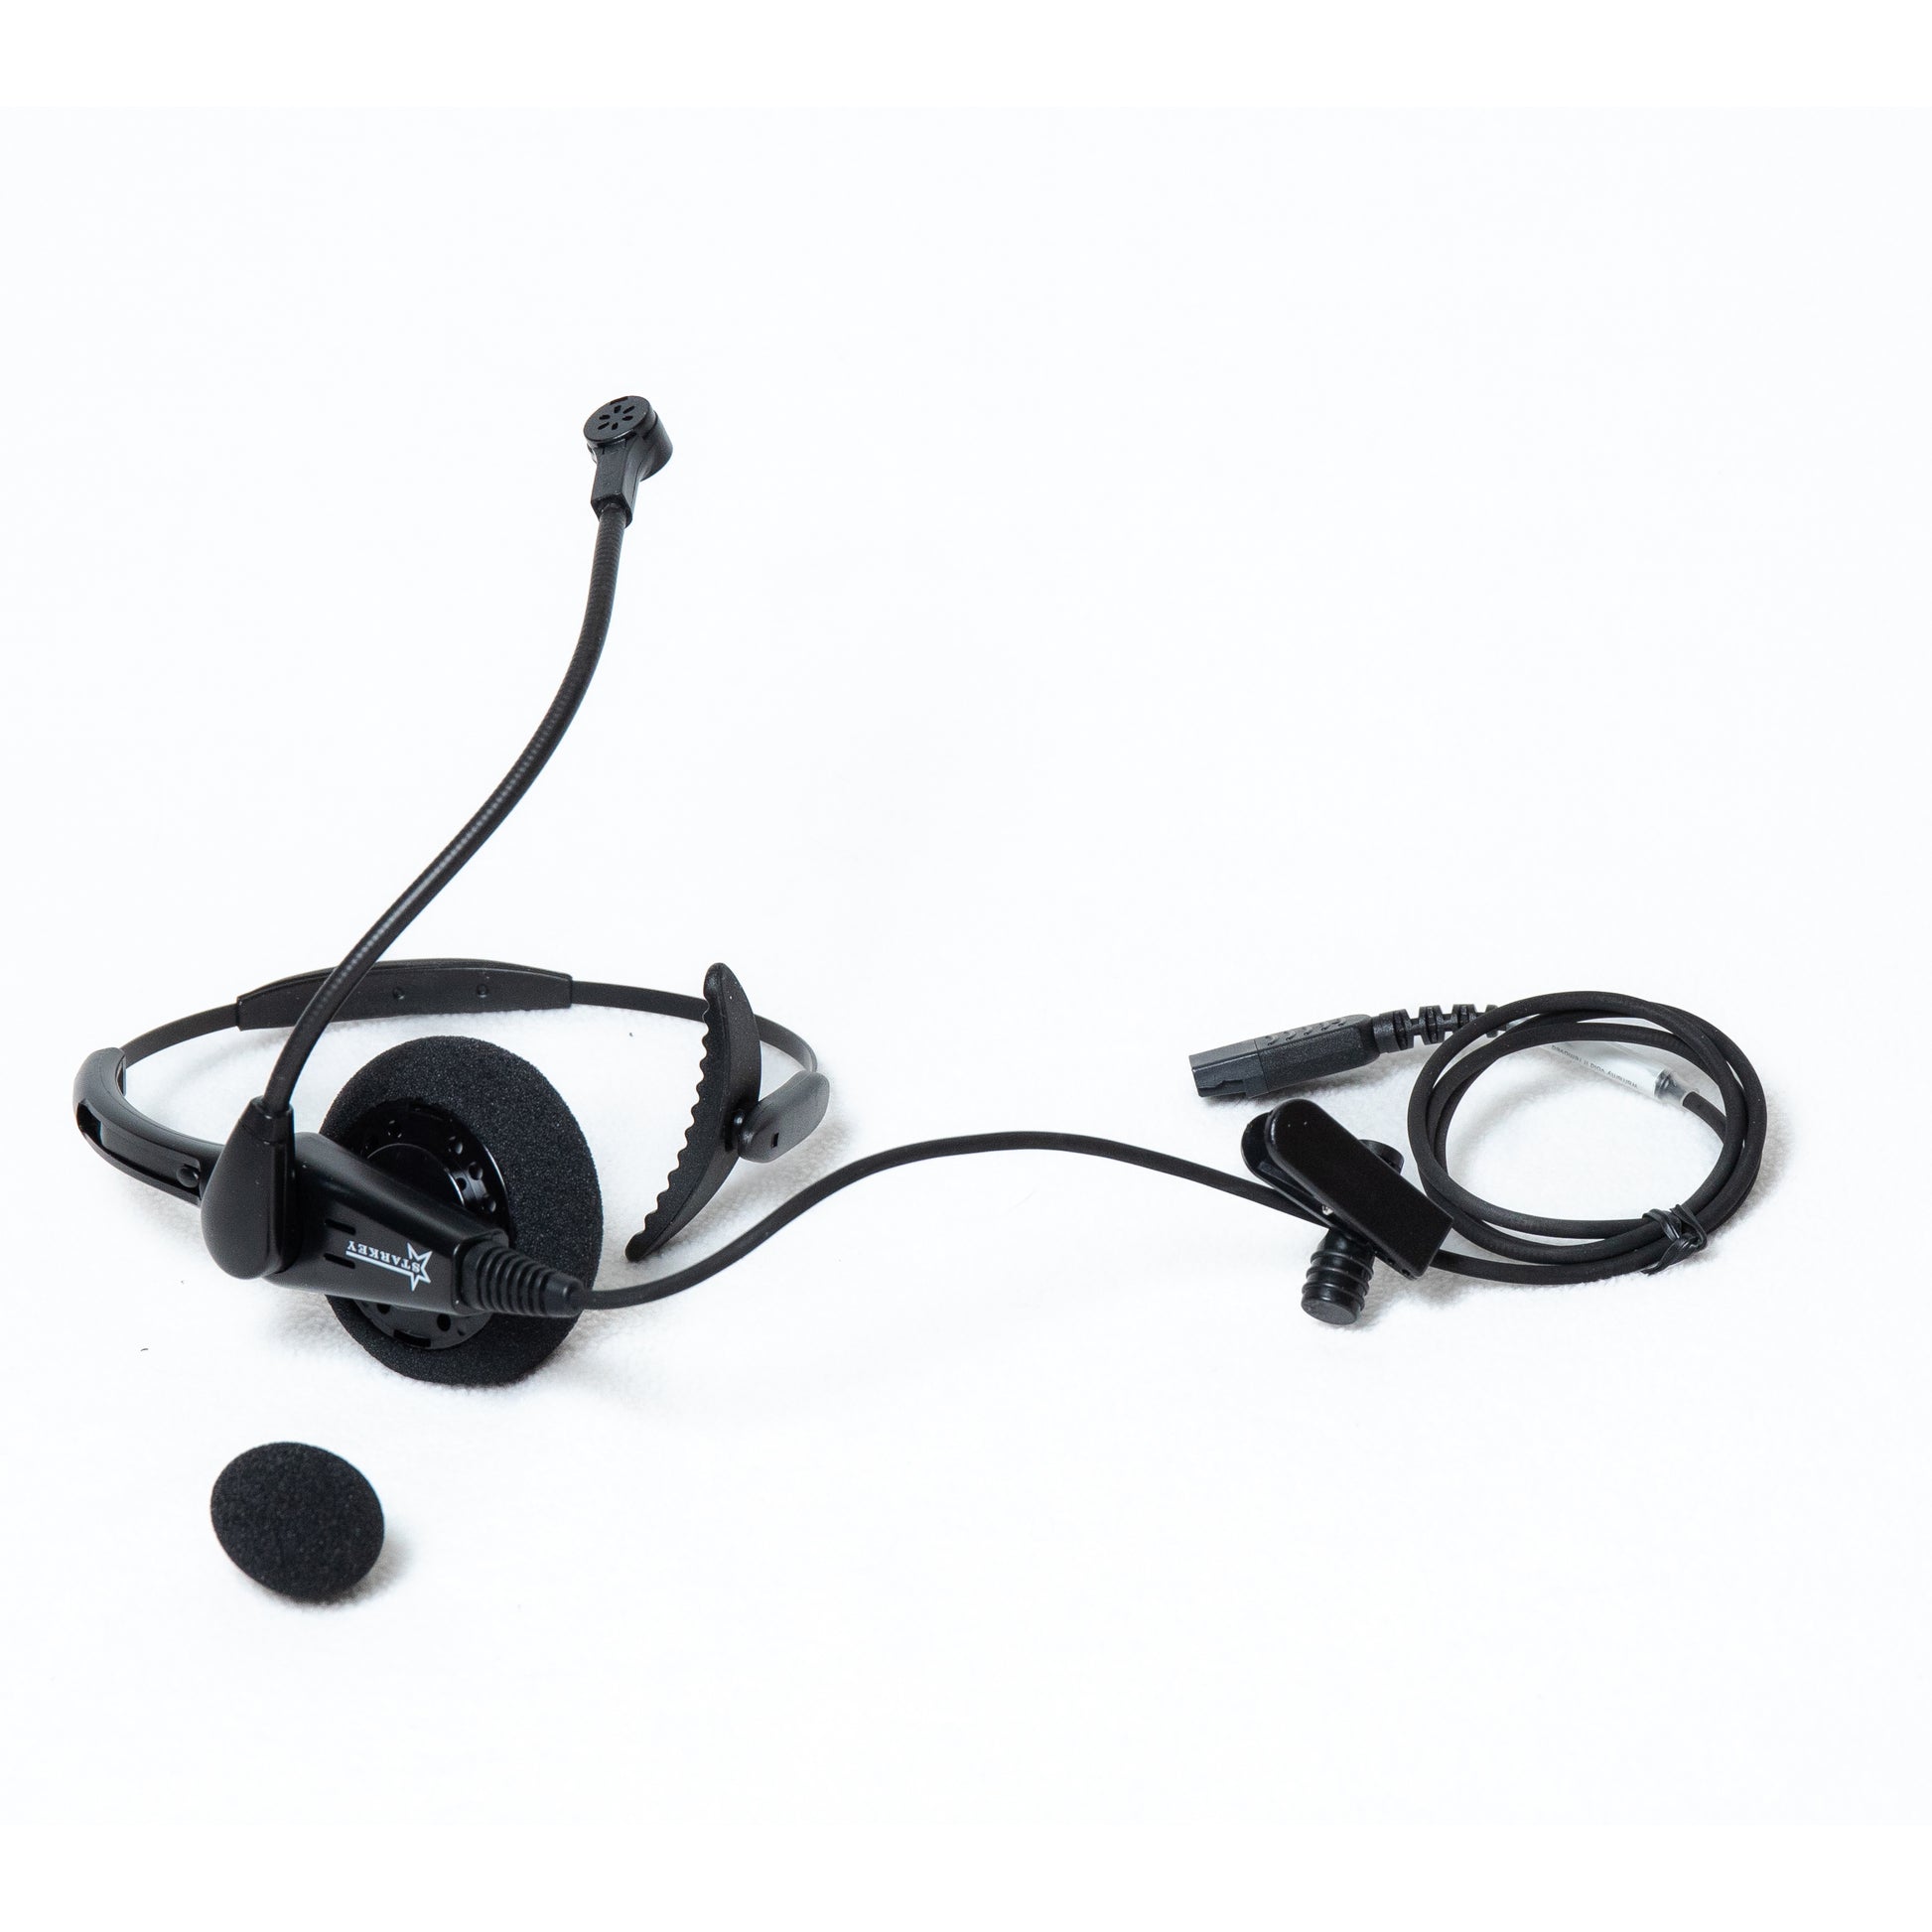 Contact Center & Call Center headsets with noise cancellation